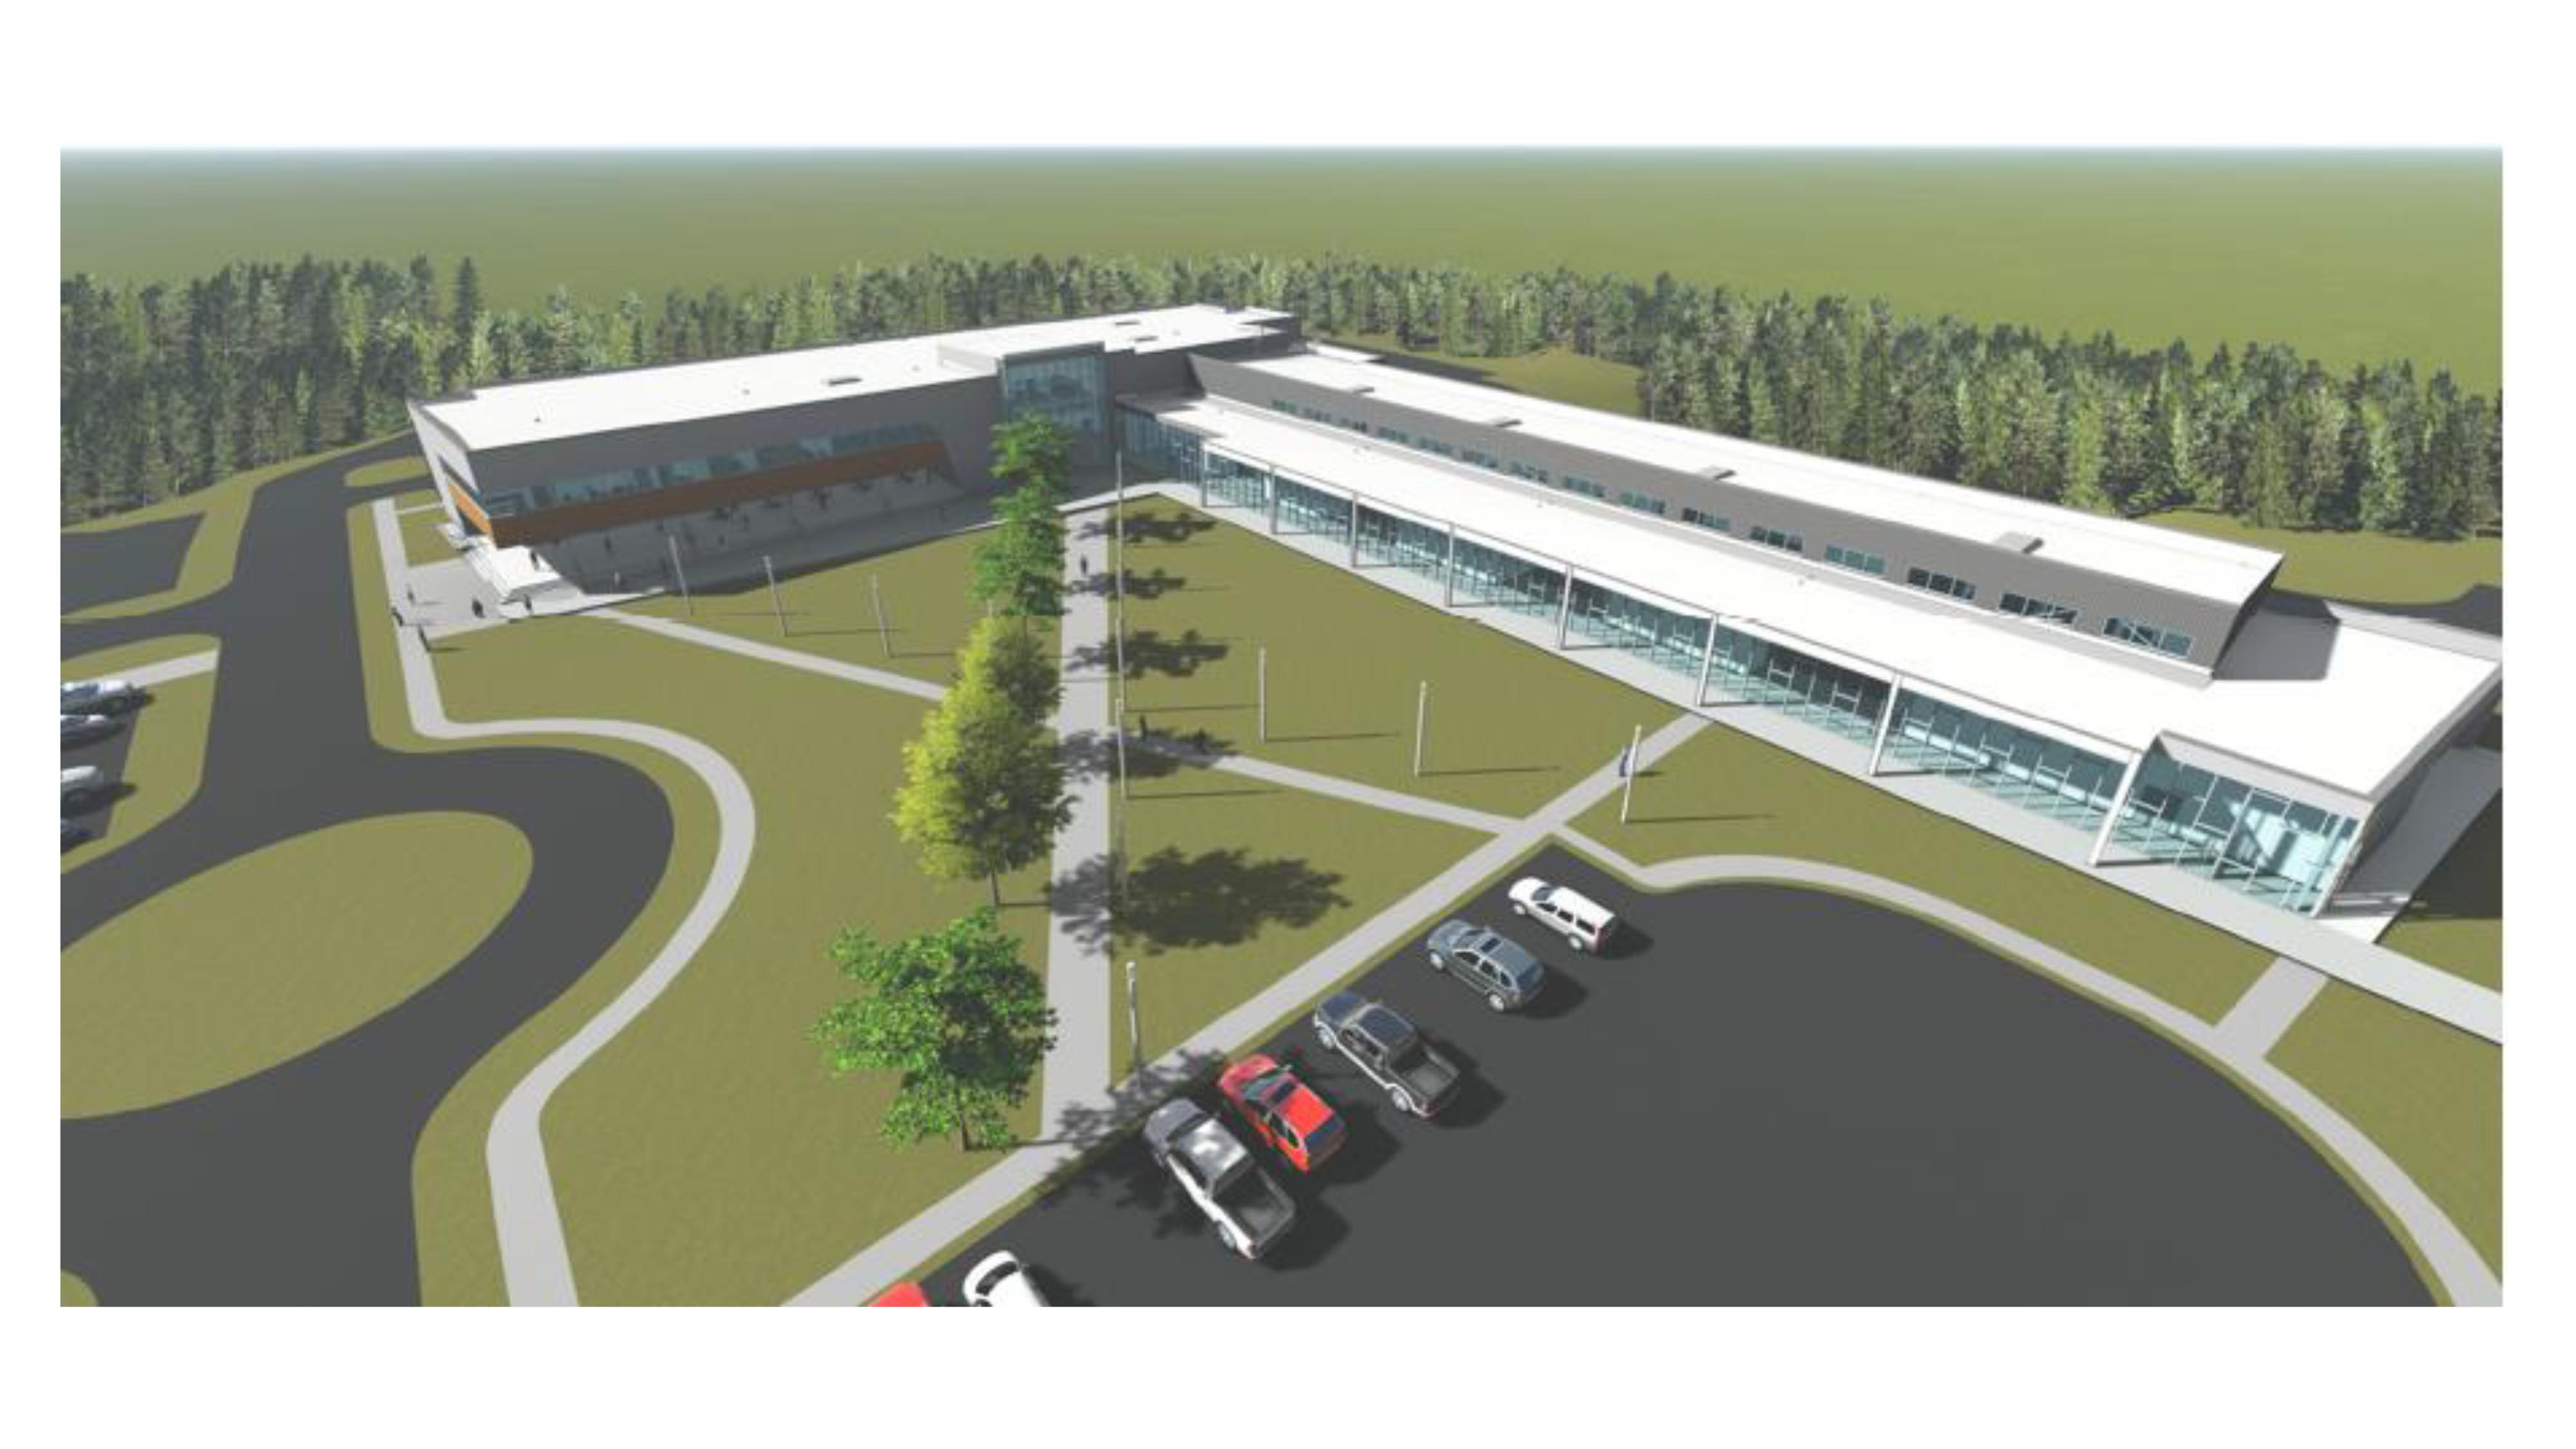 One of several drawings of what developers have in store for the brand new campus building for Georgia Northwestern Technical College. The new addition to GNTC’s Whitfield Murray Campus in Dalton, Georgia is tentatively scheduled to be completed by late 2018.